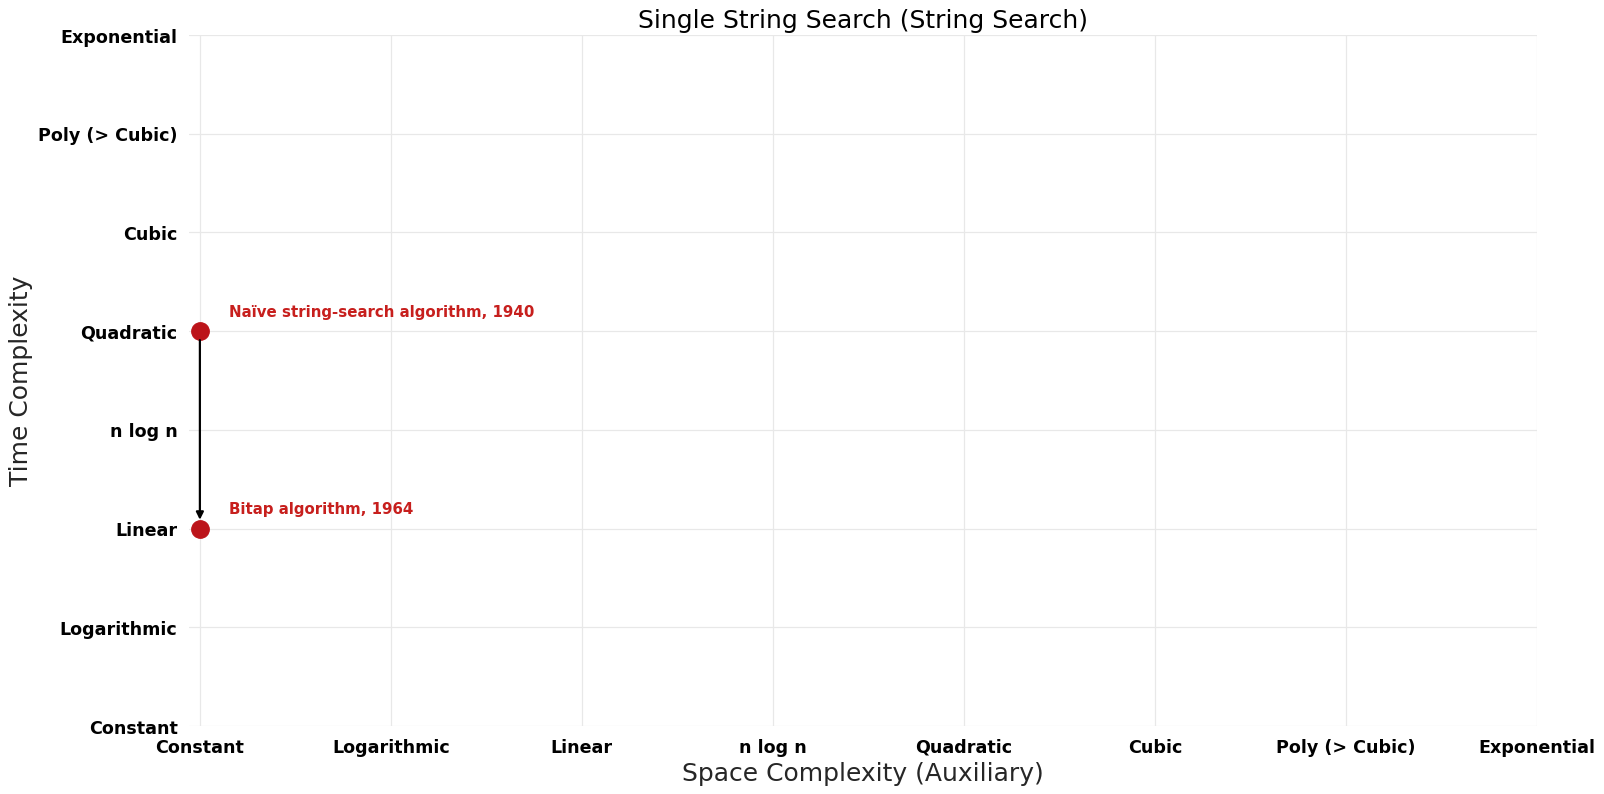 String Search - Single String Search - Pareto Frontier.png